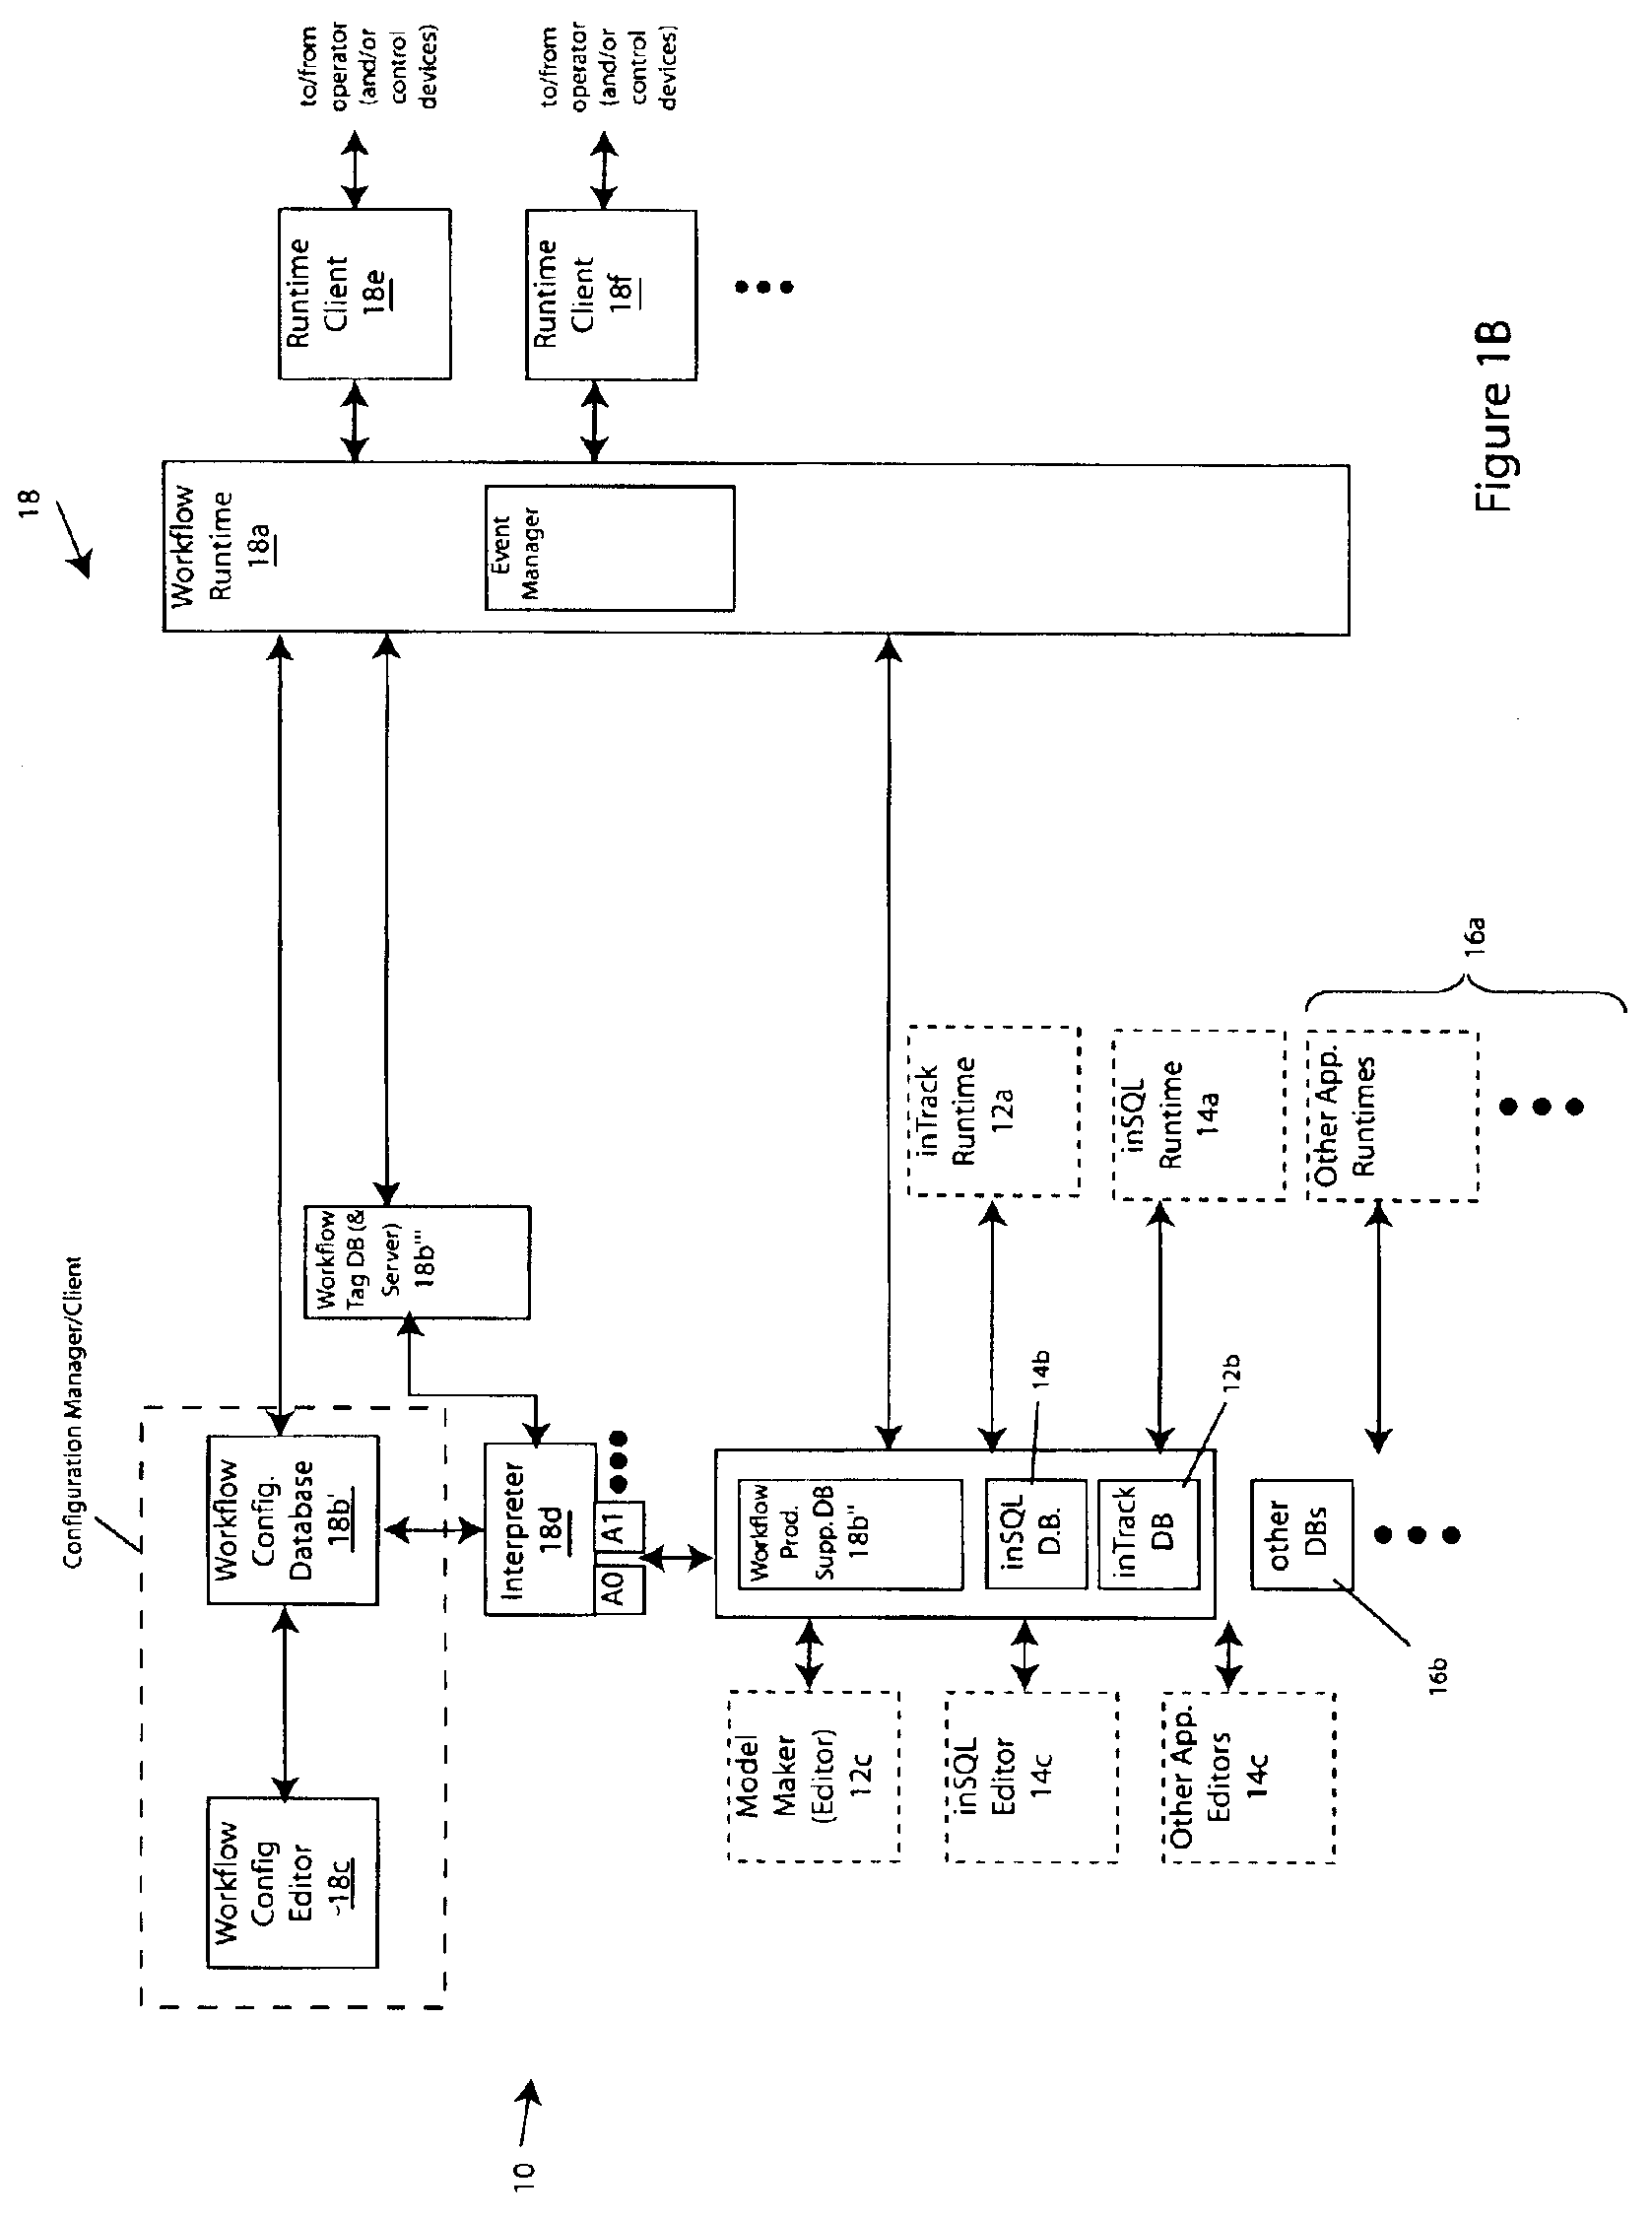 Methods and apparatus for process, factory-floor, environmental, computer aided manufacturing-based or other control system with unified messaging interface